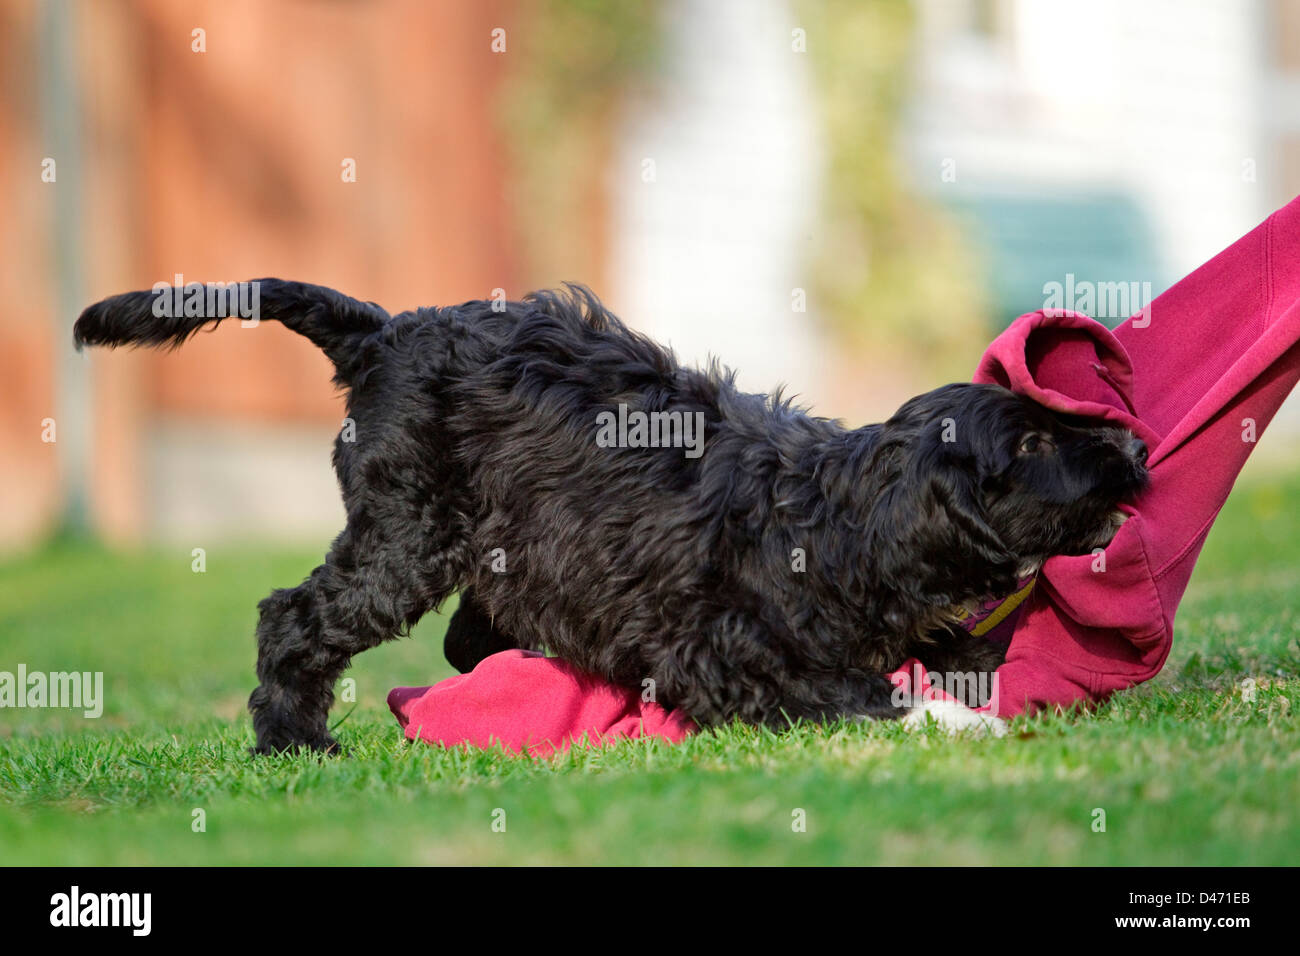 Portuguese Water Dog. Puppy pulling at a blanket Stock Photo